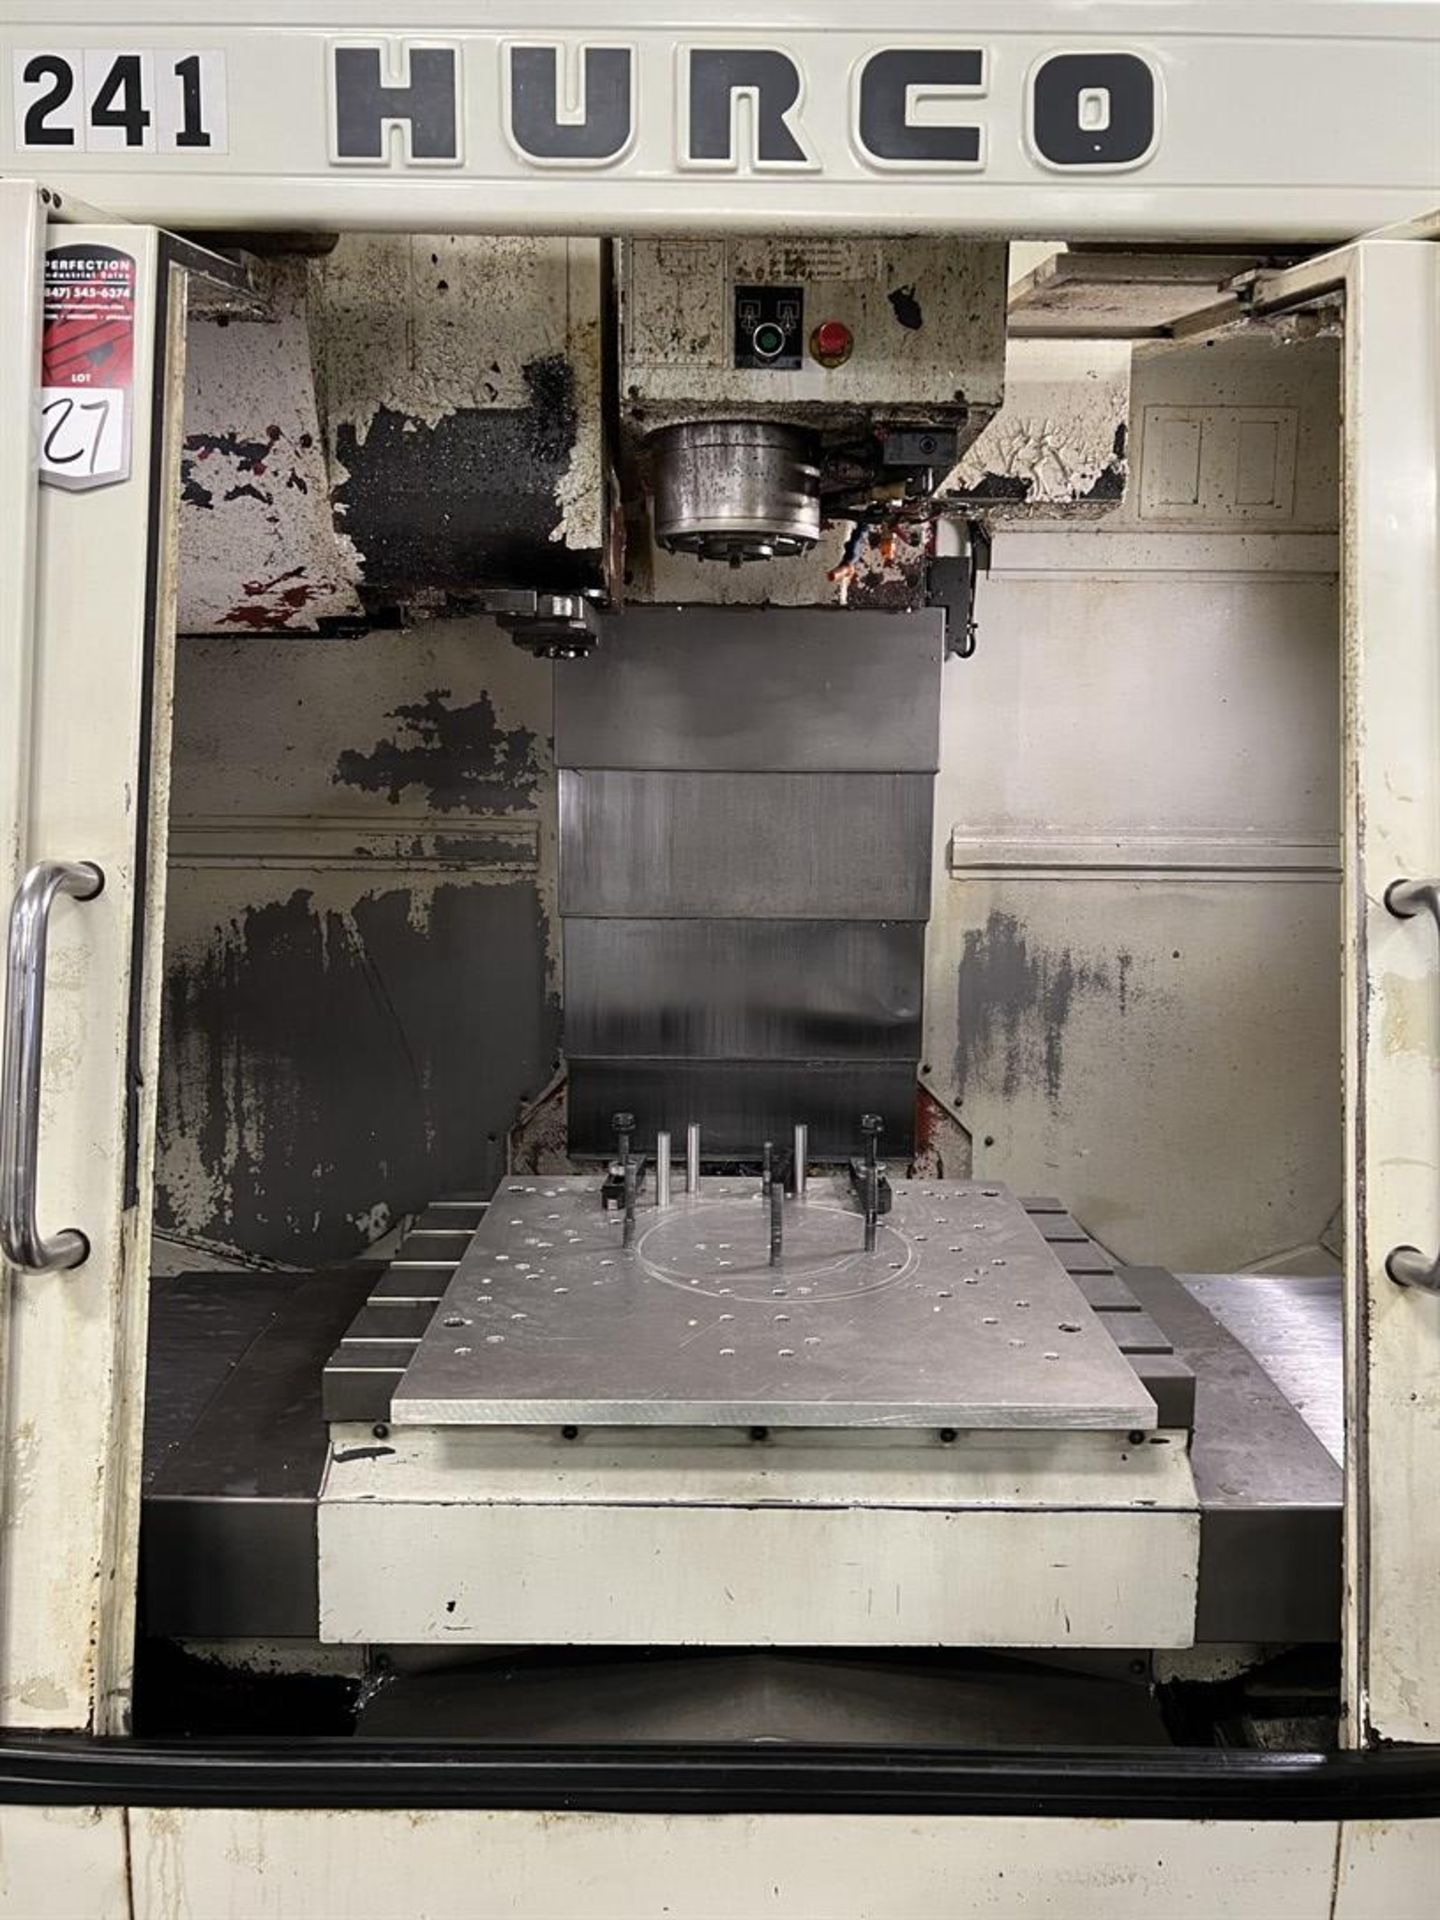 2007 HURCO VMX 24 Vertical Machining Center, s/n H-H20359, ULTIMAX Control, 24"X, 20"Y, 24"Z, 20" - Image 3 of 11